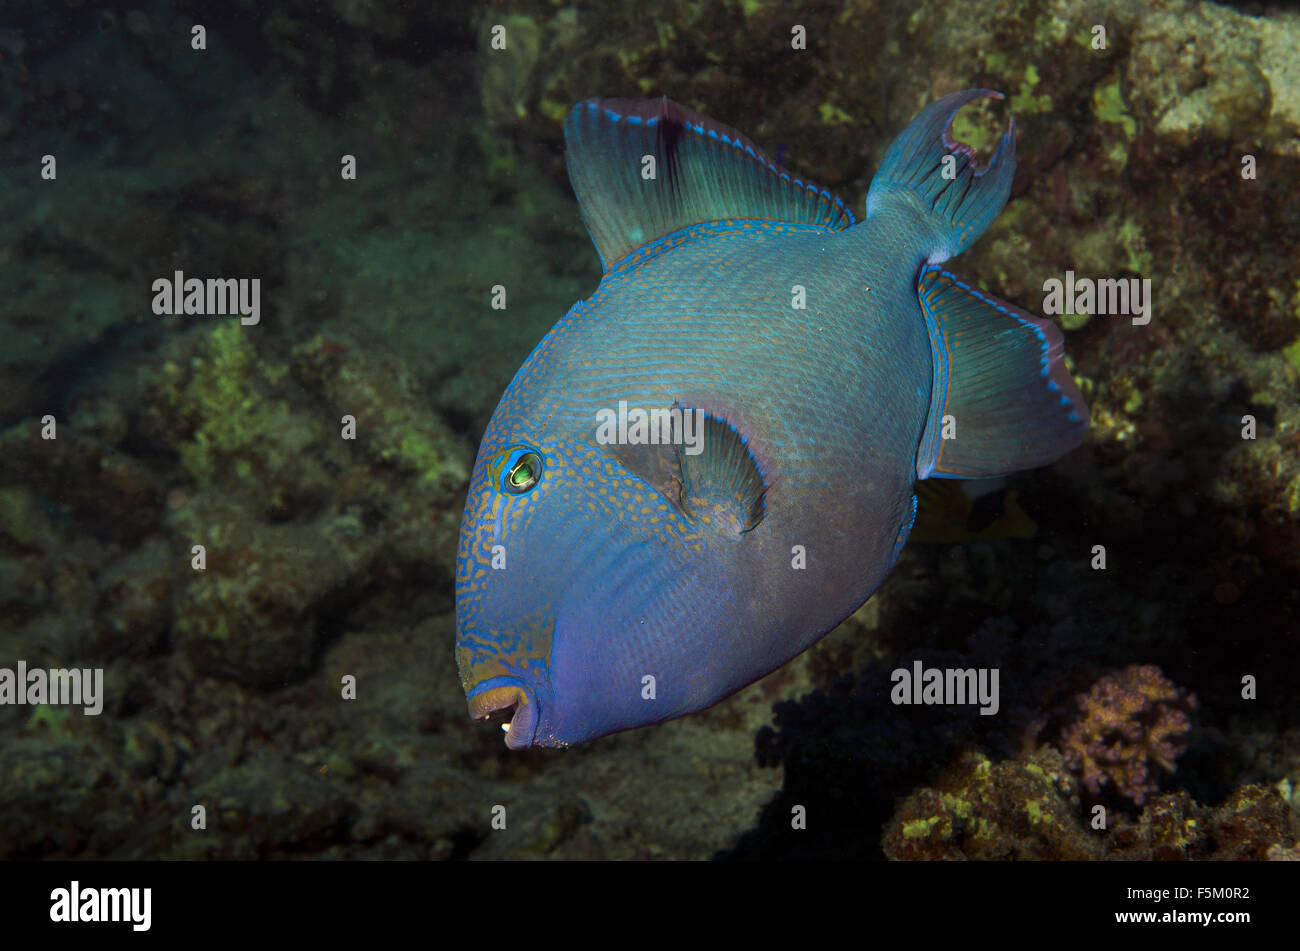 Blue triggerfish, Pseudobalistes fuscus, on coral reef in Red Sea at Marsa Alam, Egypt Stock Photo